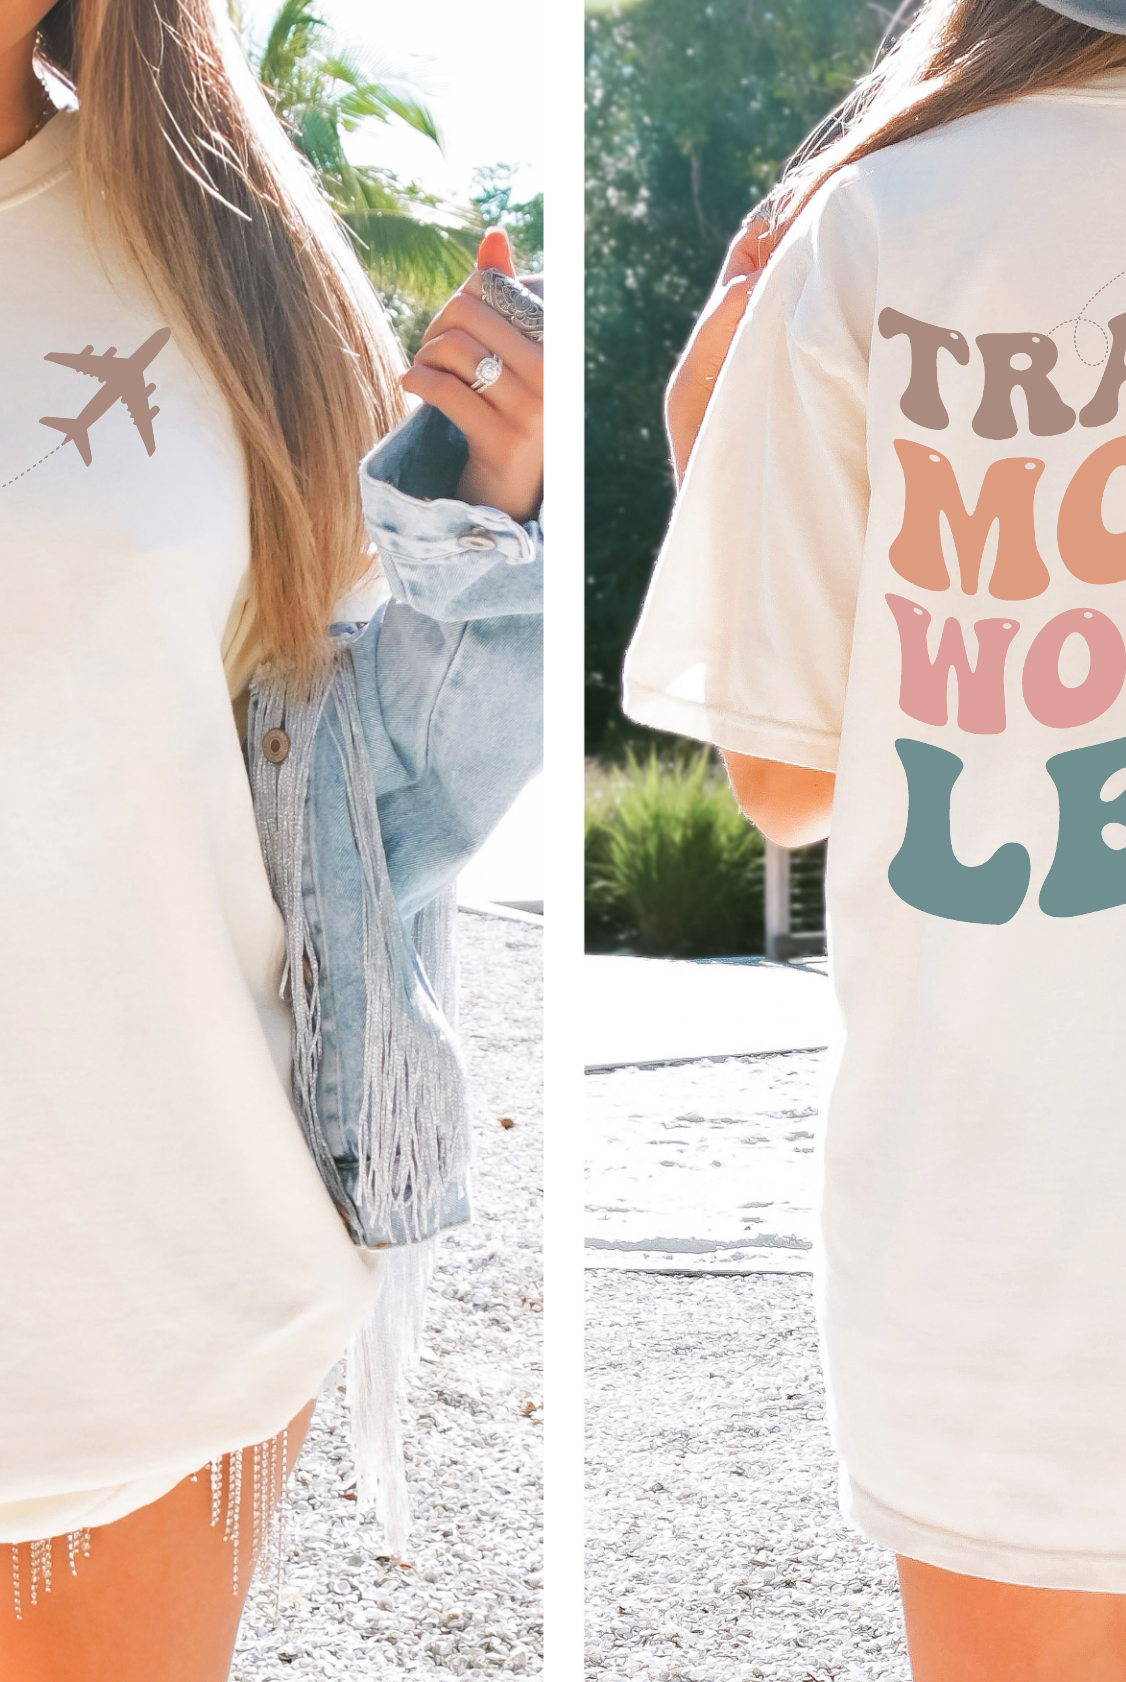 Travel More Worry Less Graphic Tee-Graphic Tee- Simply Simpson's Boutique is a Women's Online Fashion Boutique Located in Jupiter, Florida